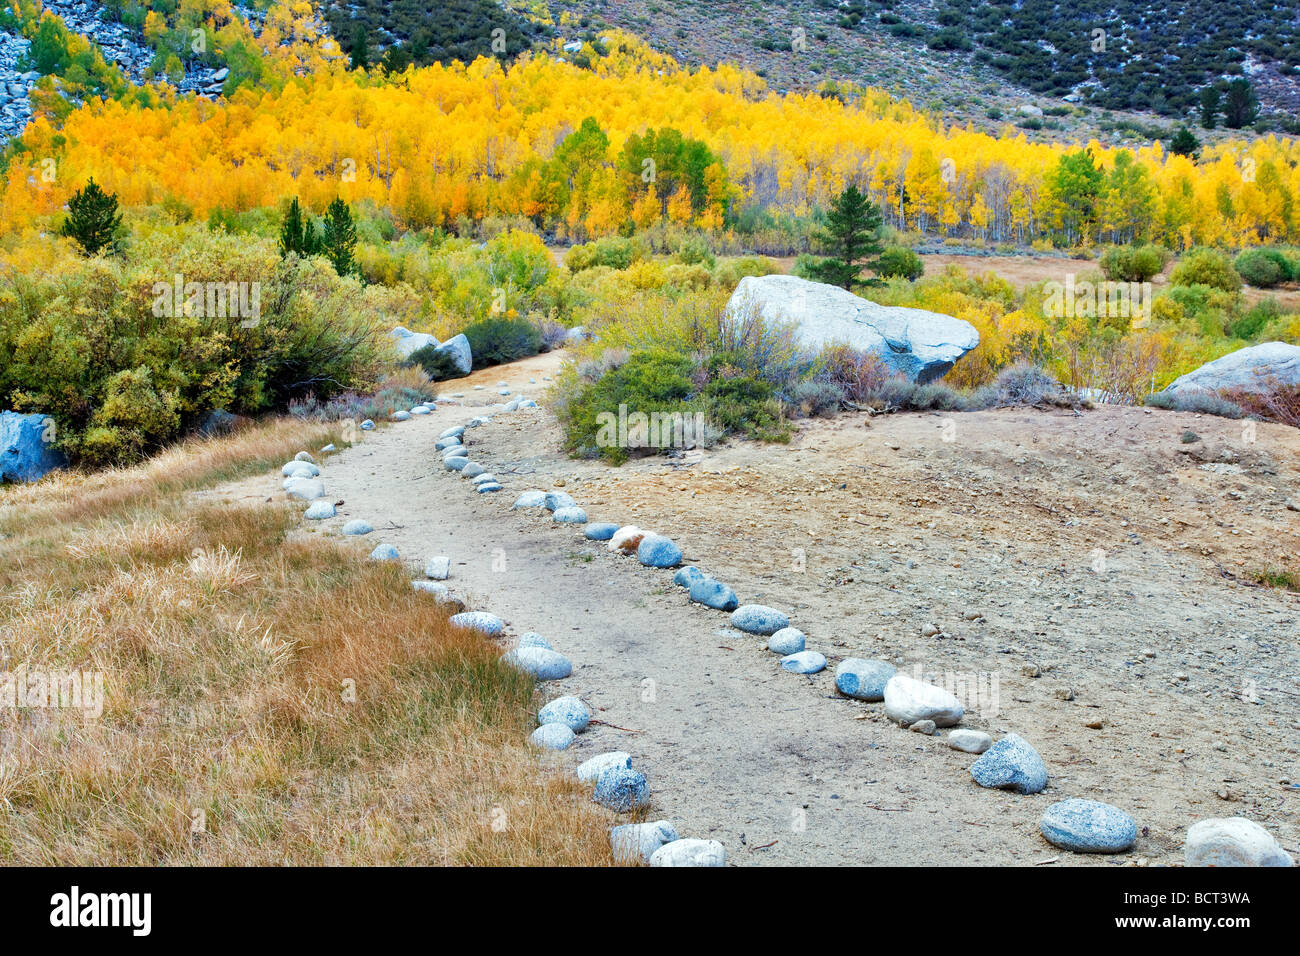 Rock path with fall colored aspens Inyo National Forest Eastern Sierras California Stock Photo